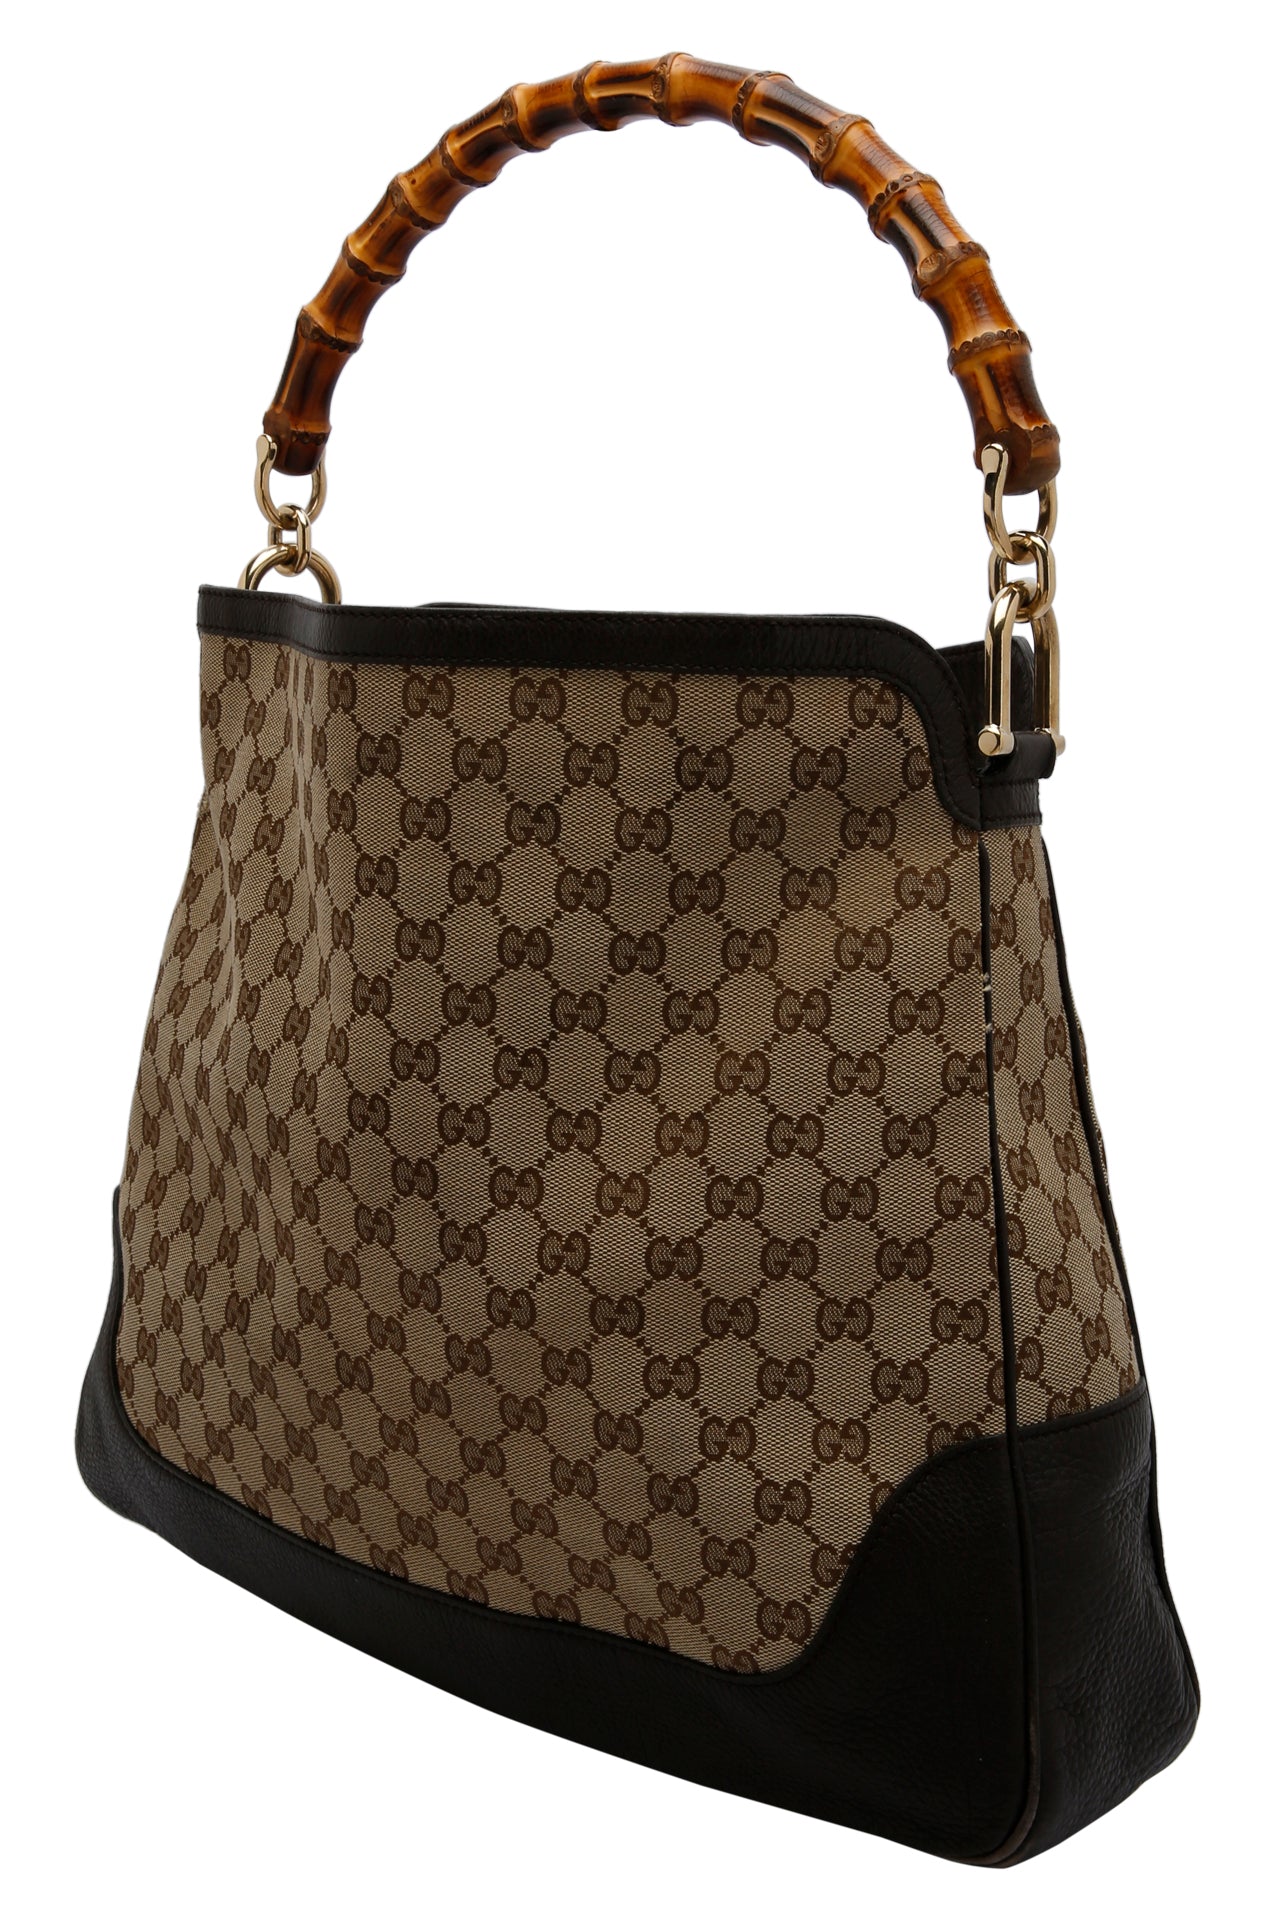 Gucci Beige Ebony GG Canvas Leather Peggy Bamboo Top Handle Bag